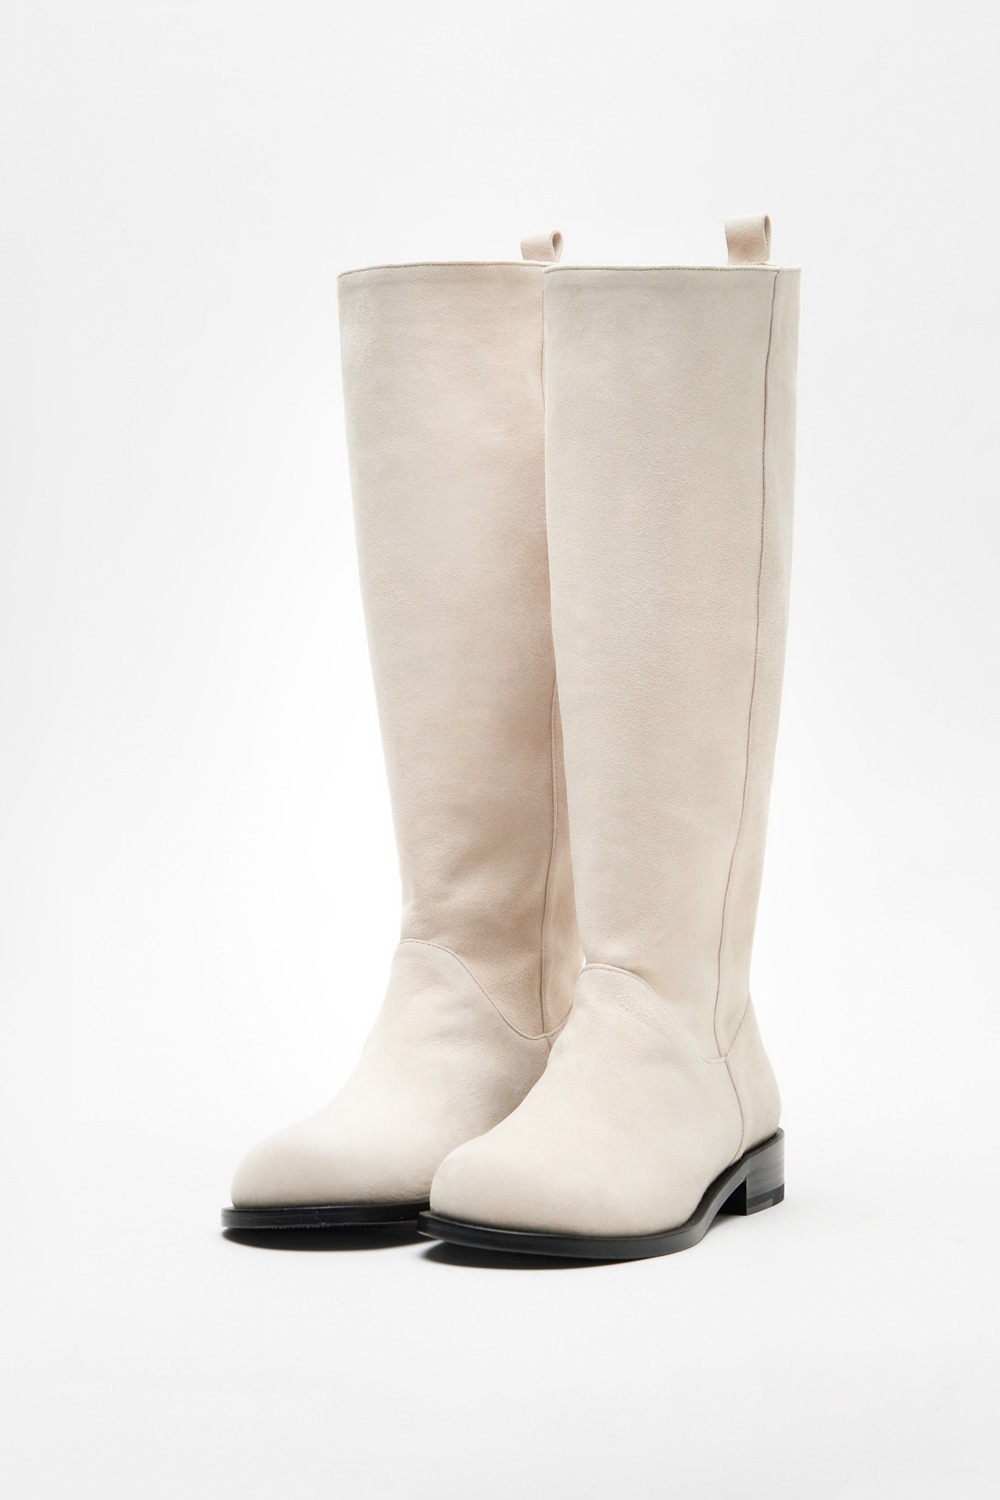 Knee-High Suede Boots (Women) - Ivory